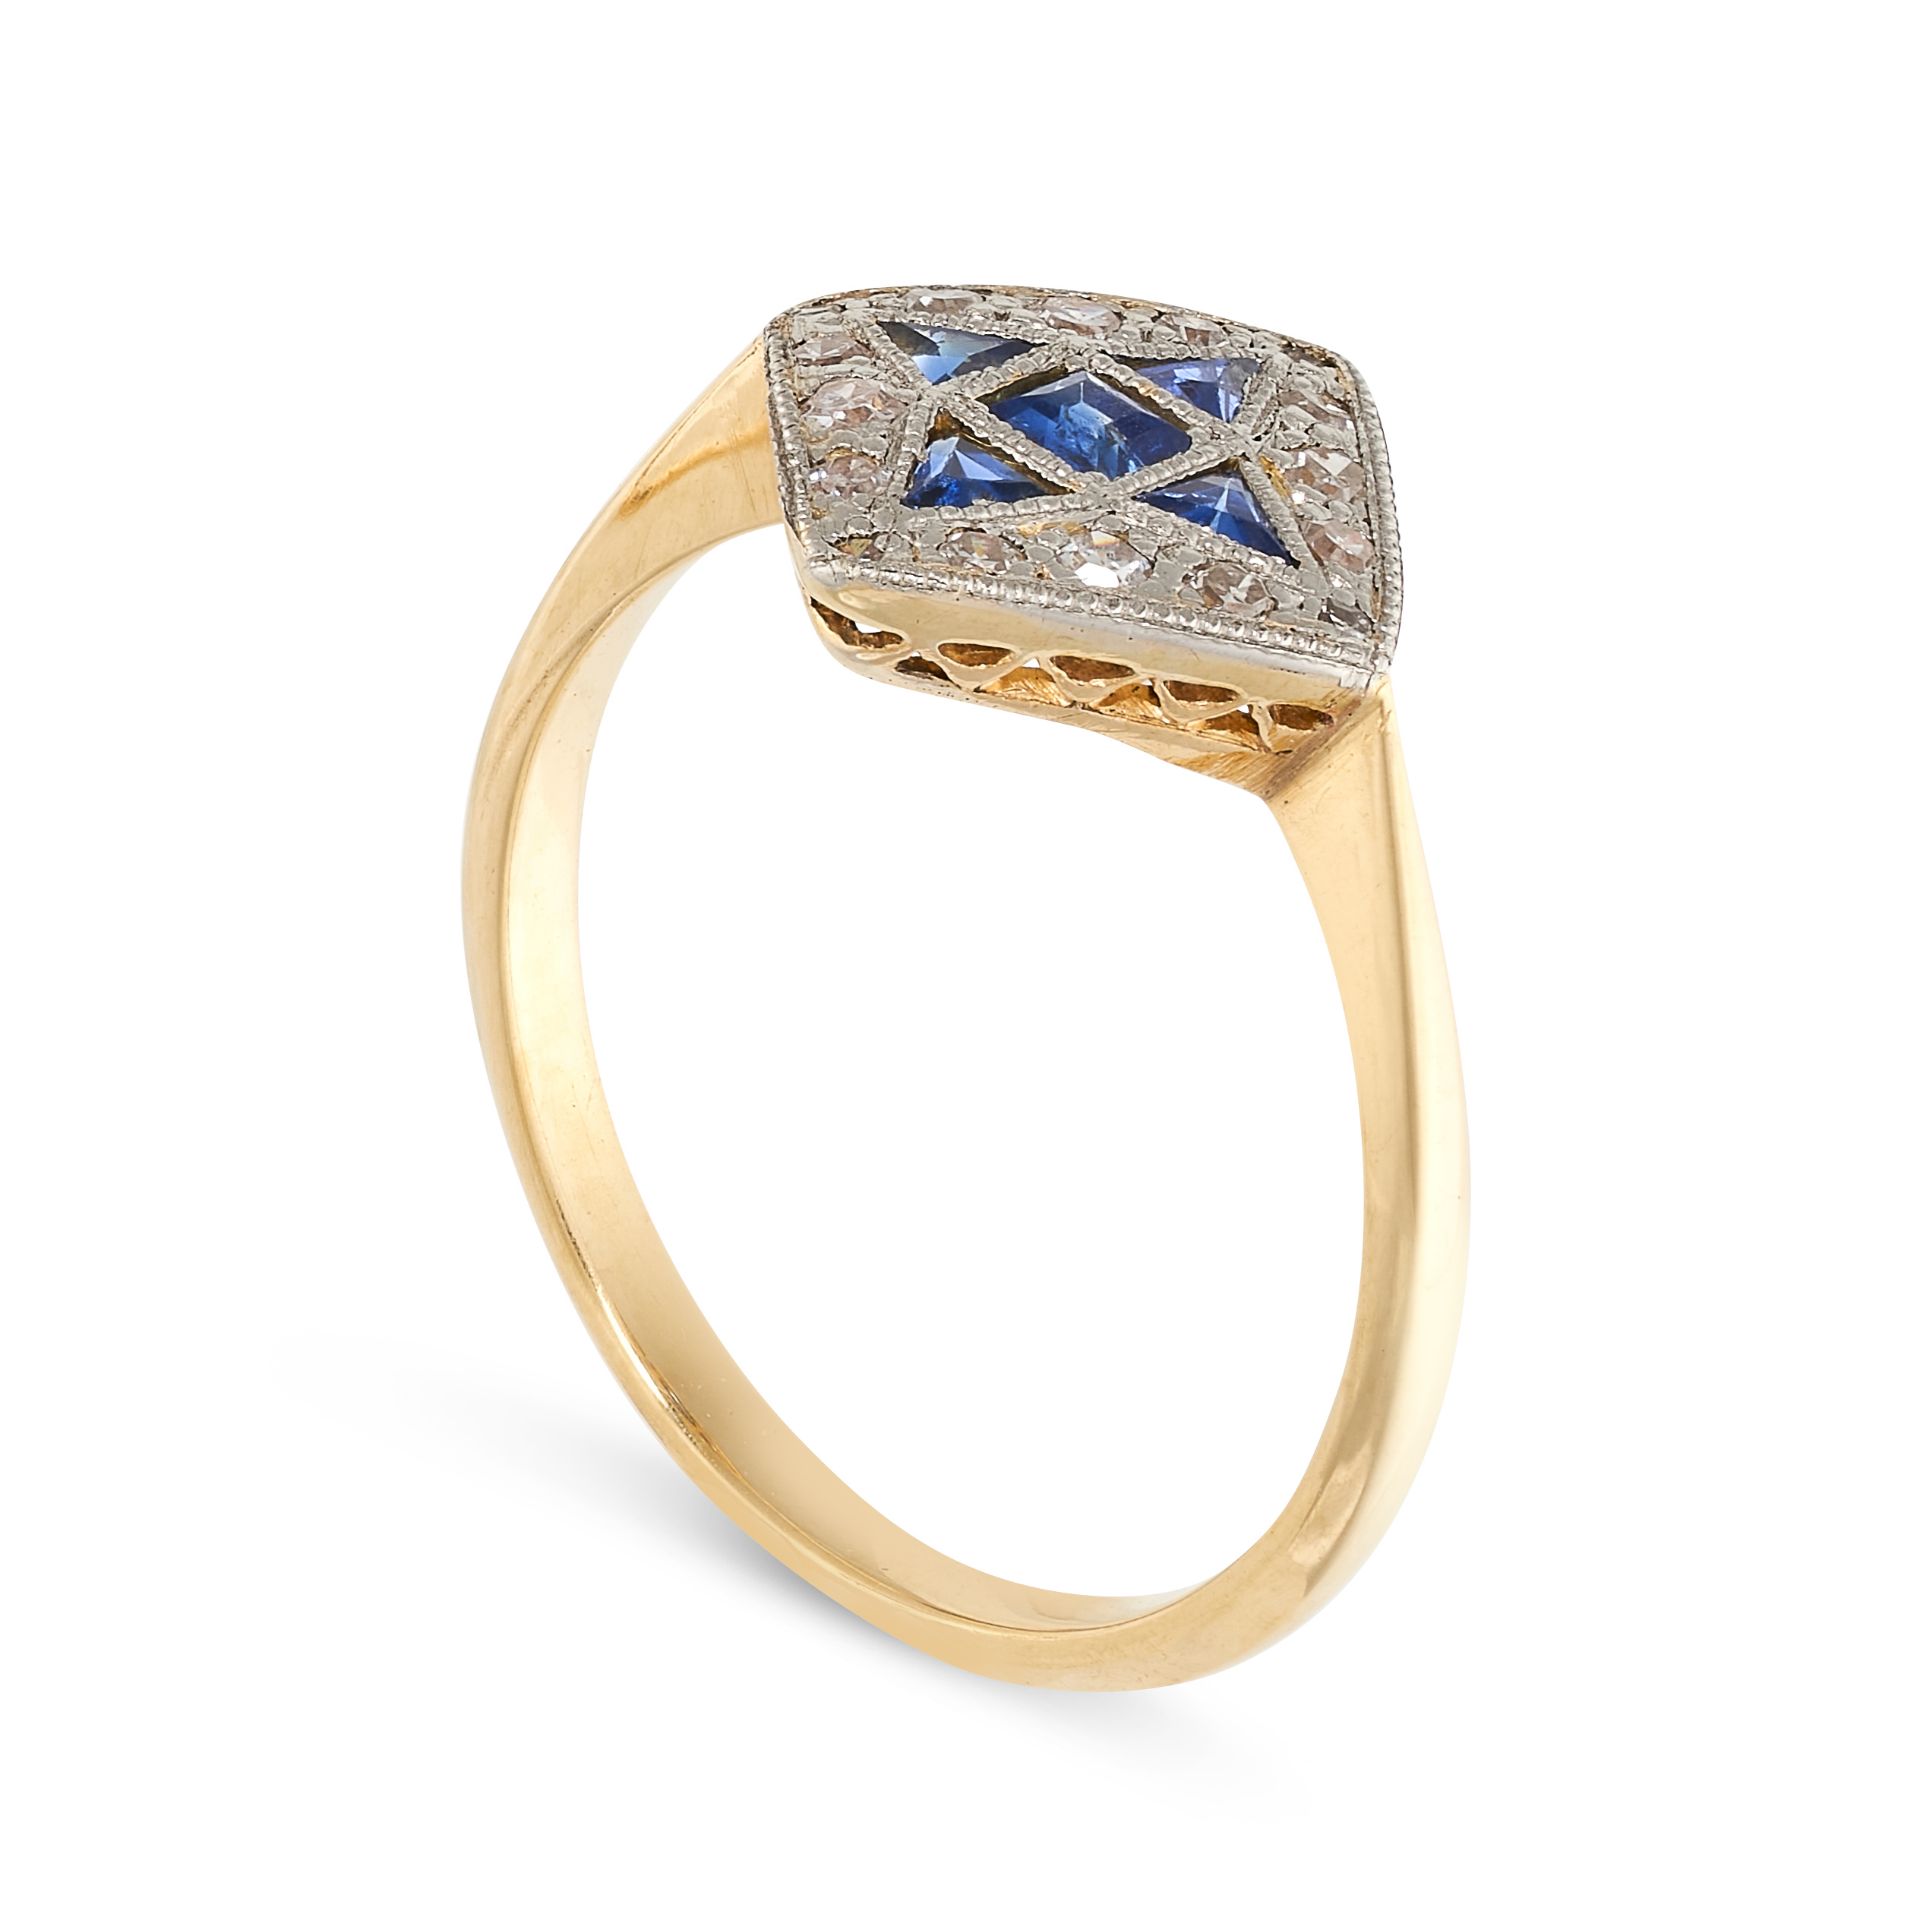 NO RESERVE - A SAPPHIRE AND DIAMOND DRESS RING in 18ct yellow gold, set with step cut and French cut - Image 2 of 2